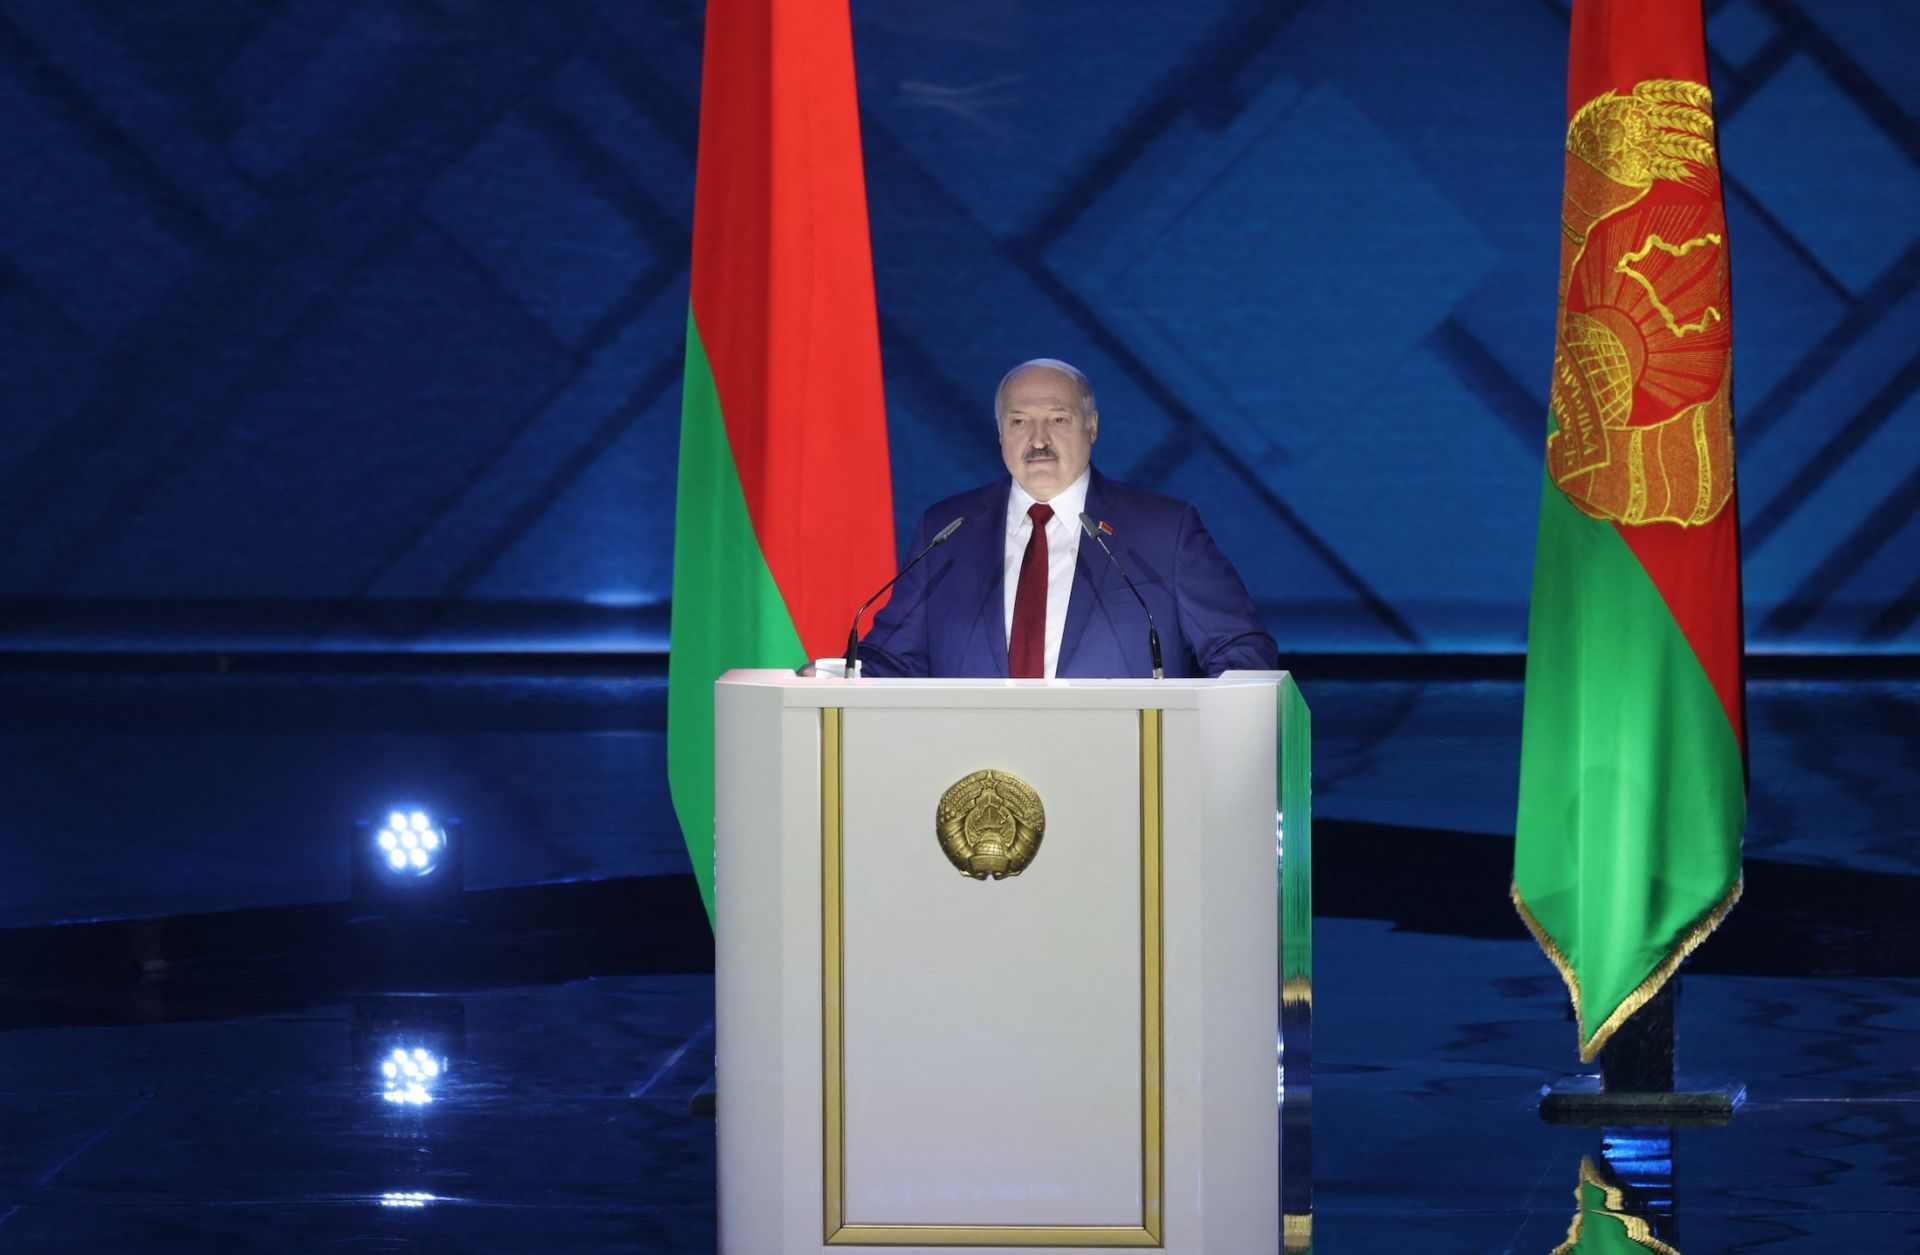 Belarus President Alexander Lukashenko gives a speech during his annual address to the Belarusian People and the National Assembly in Minsk on Jan. 28, 2022.